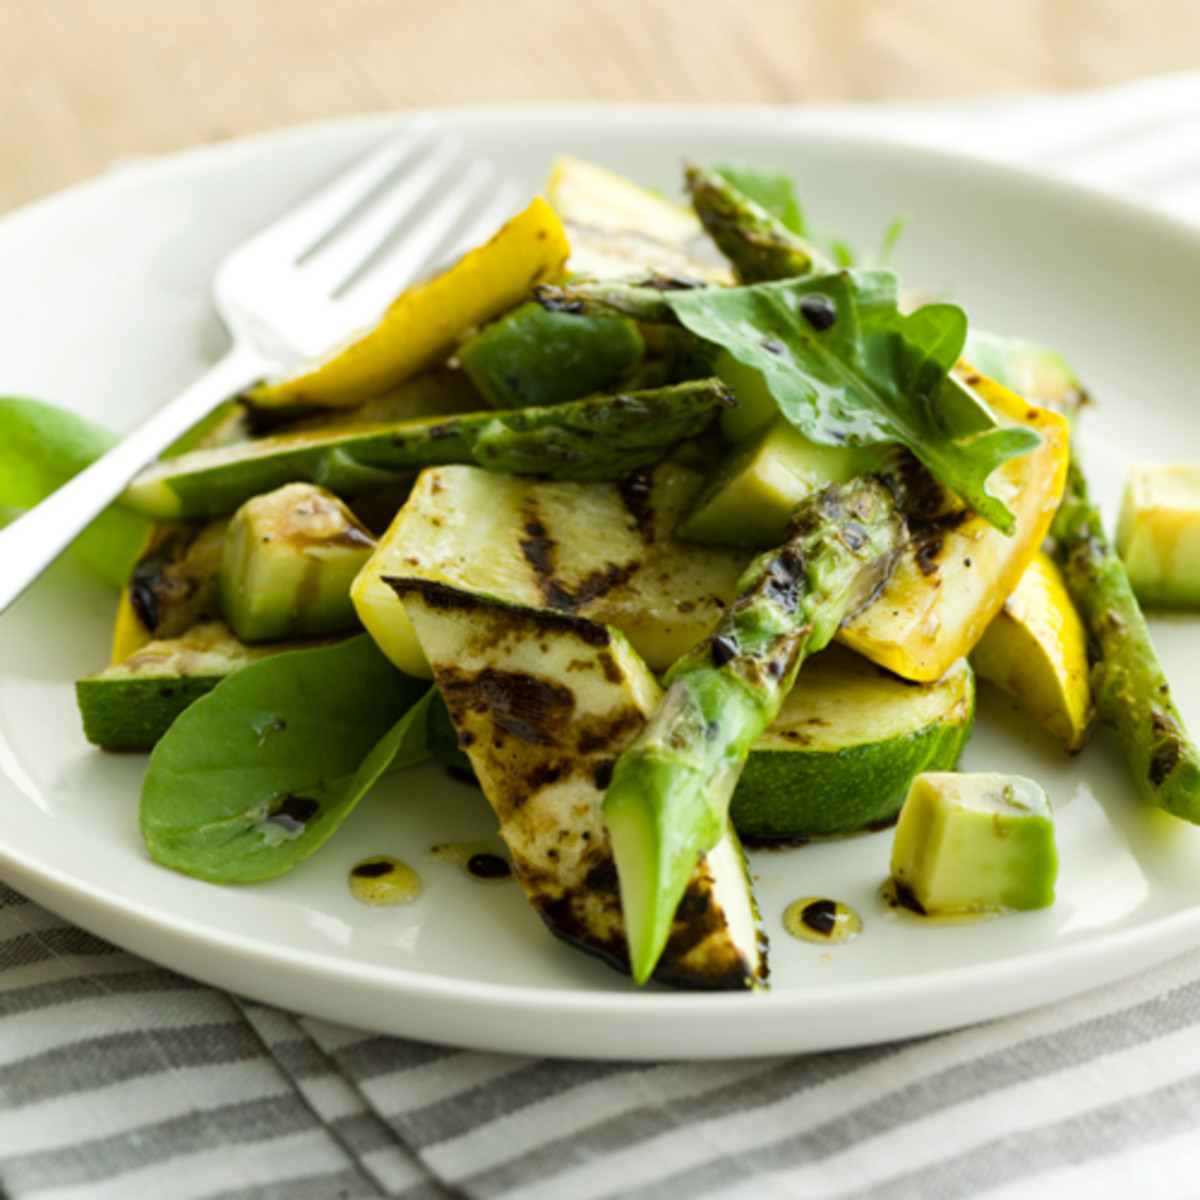 Grilled Summer Squash
 Grilled Zucchini and Summer Squash Salad with Avocado